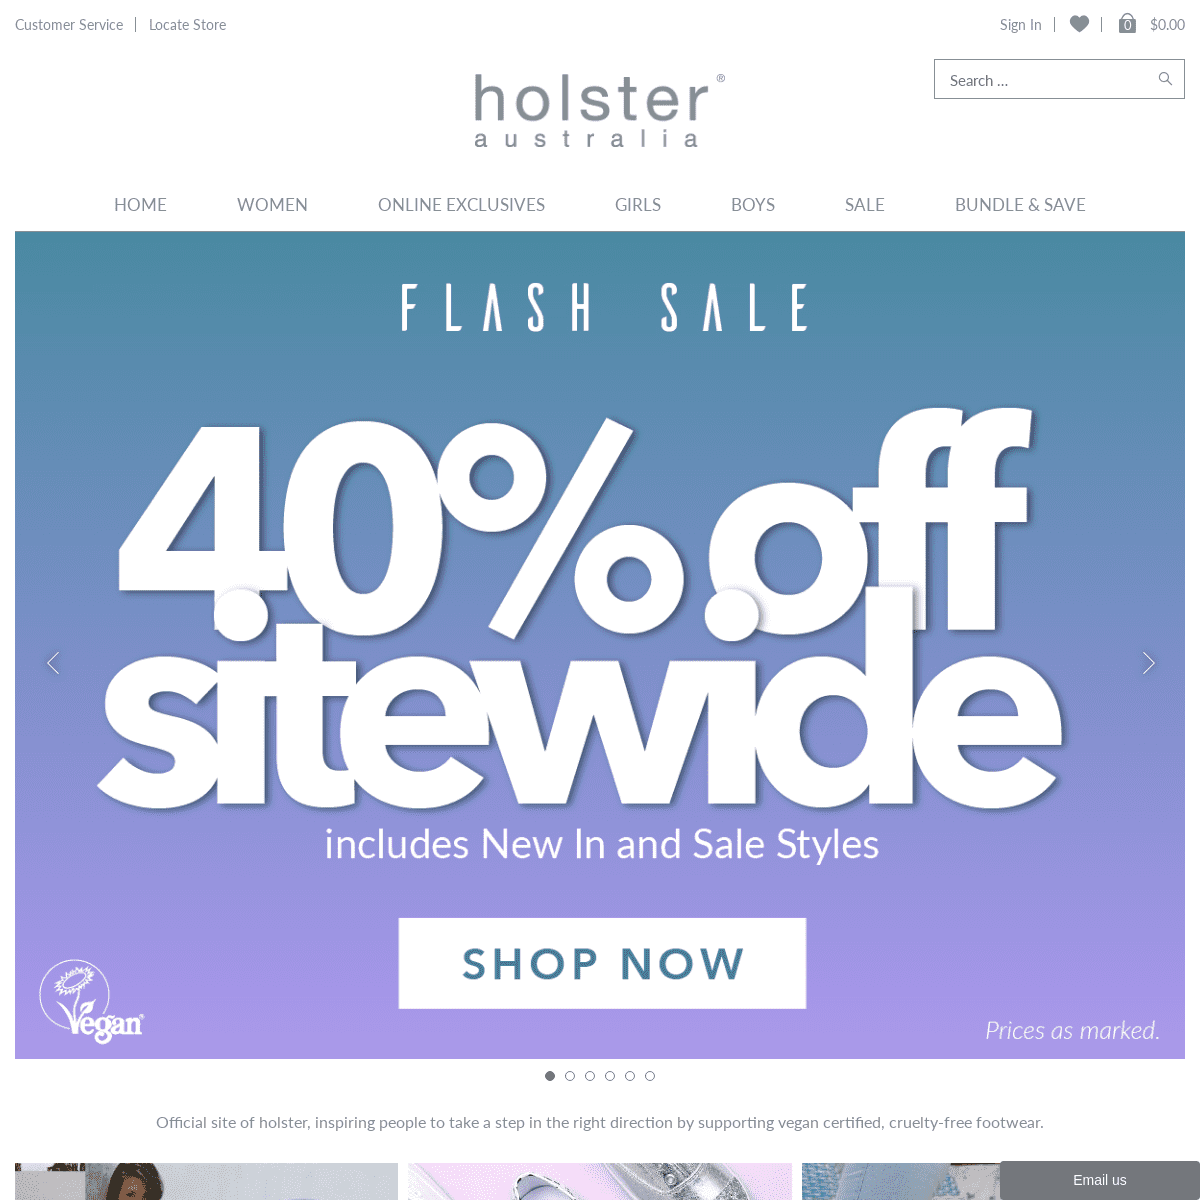 A complete backup of holsterfashion.com